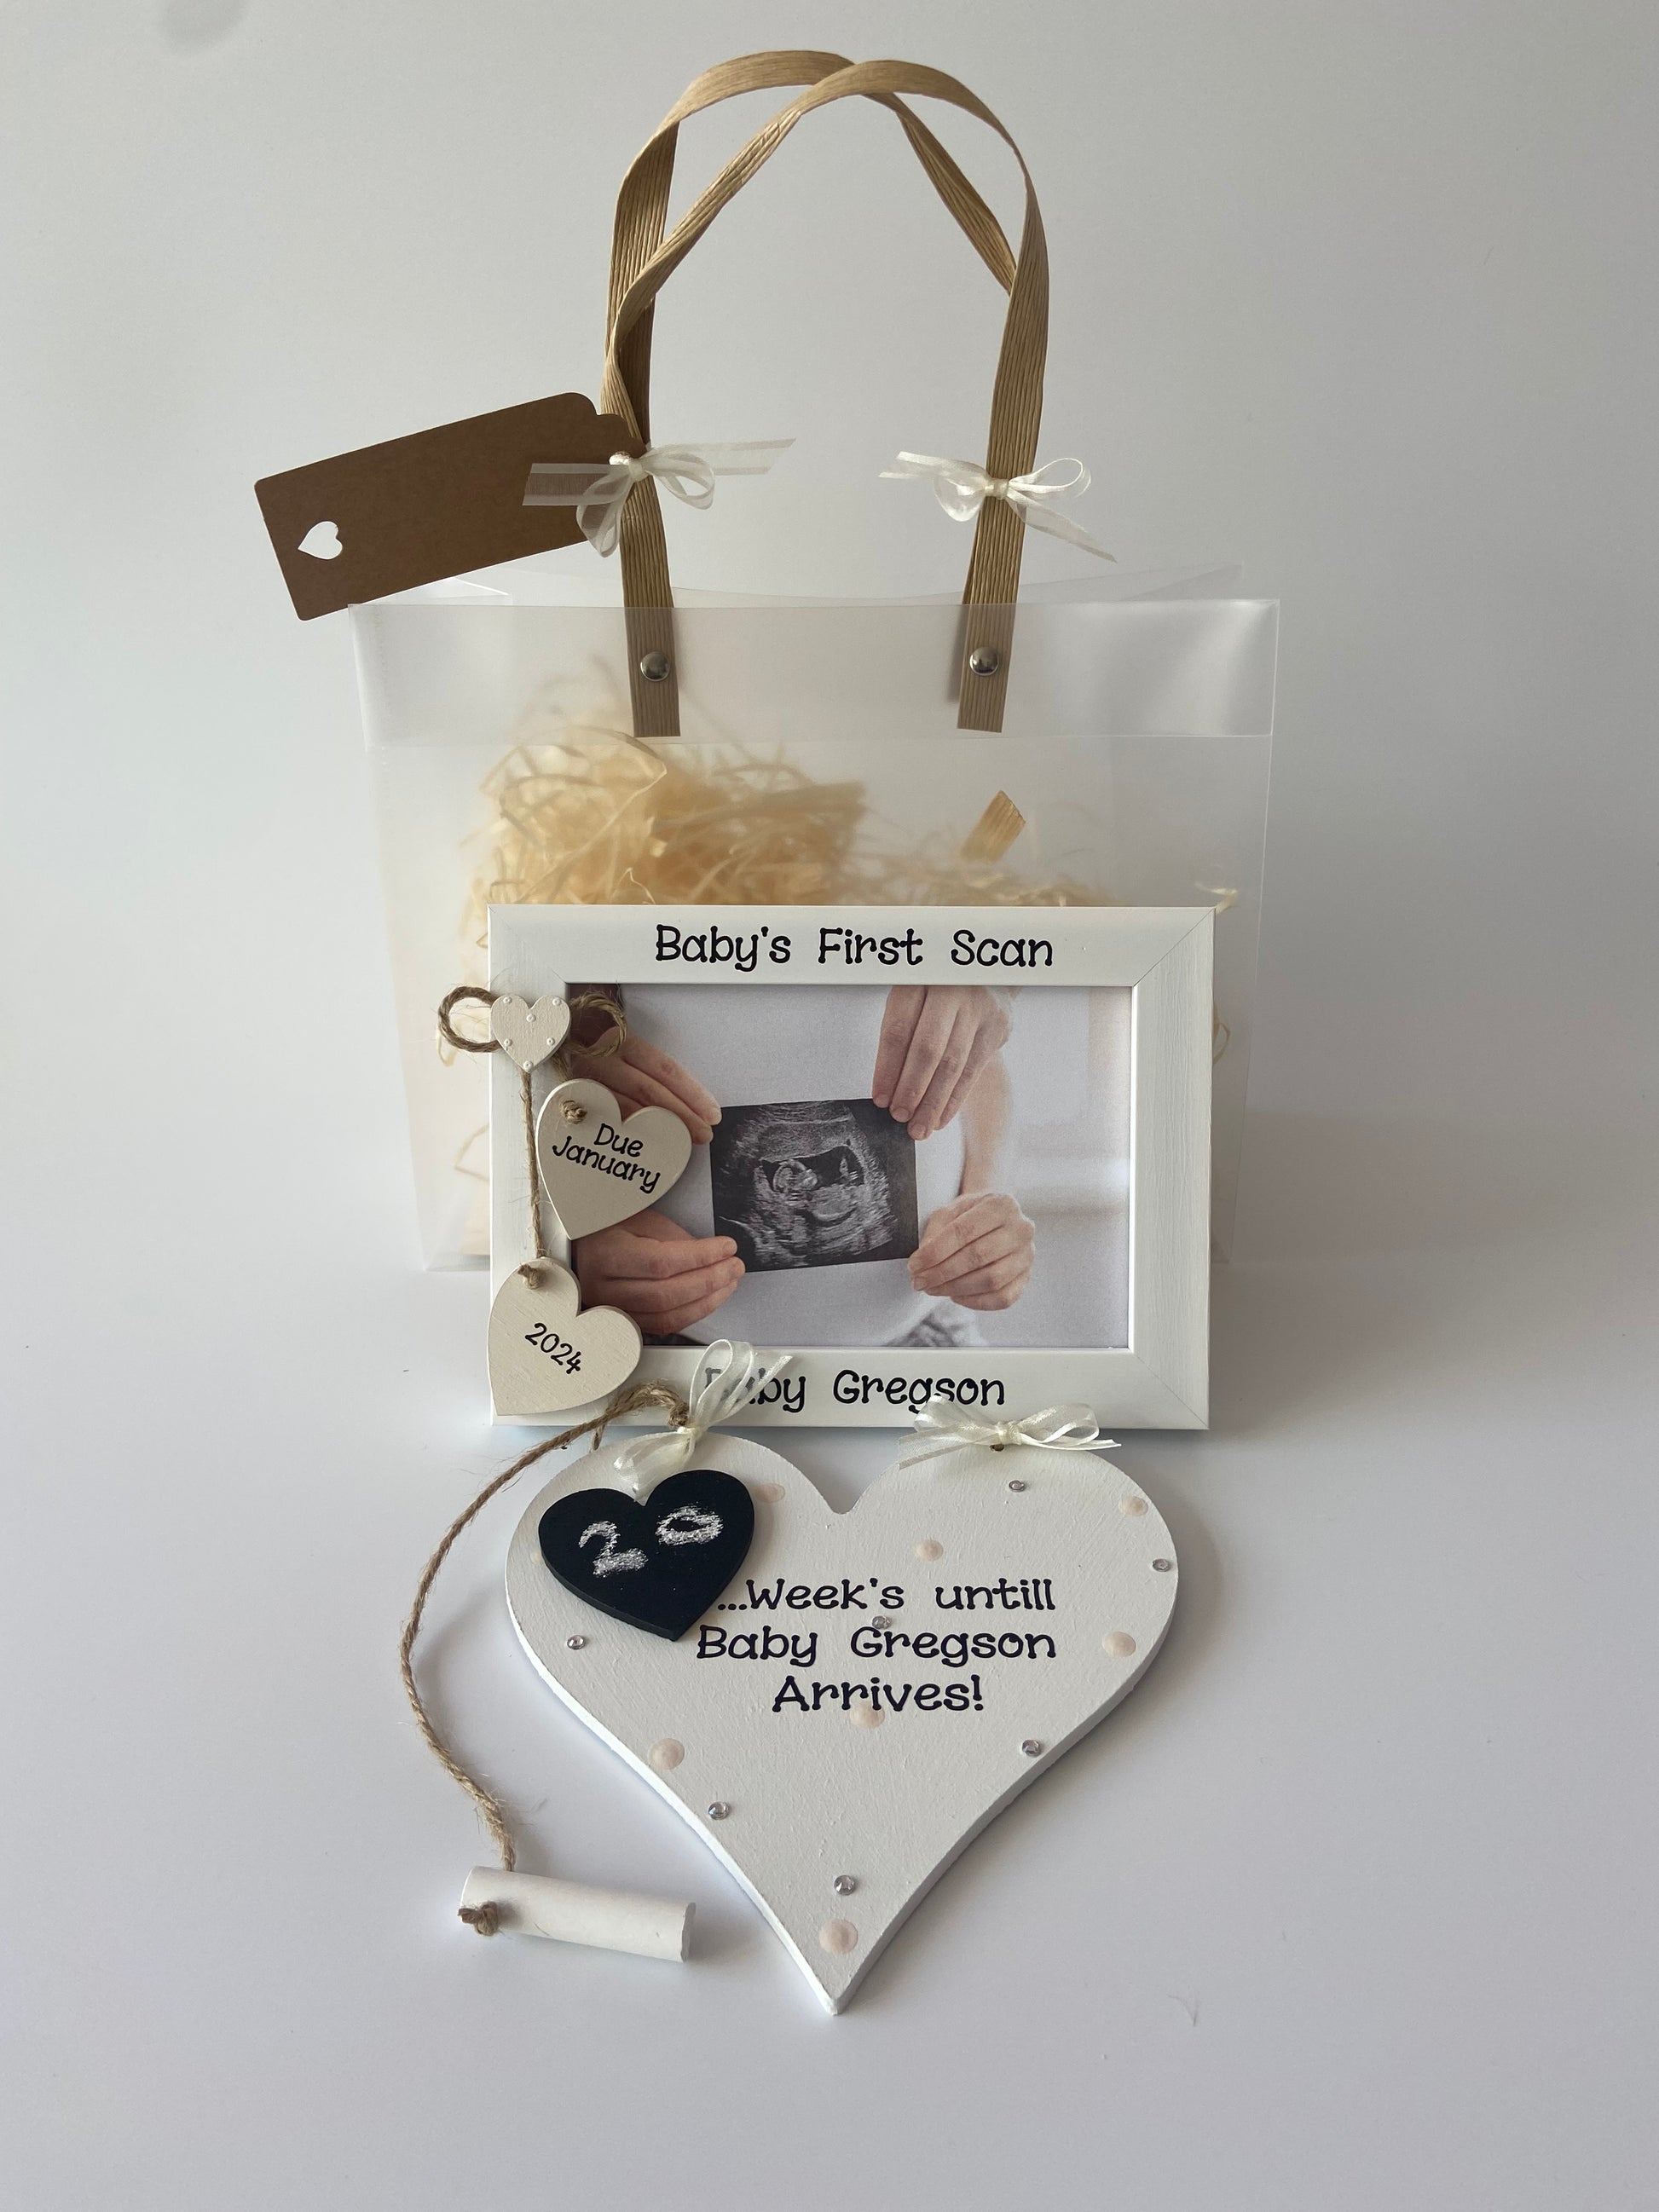 Image shows a baby's first scan matching photo frame and plaque gift set. Photo frame consists of two hanging hearts with due date and a small heart placed above with with polka dots. Plaque decorated with polka dots, gems and ribbon, with a piece of chalk attached in order to count down the weeks to the due date. Also includes gift wrap and photo of your choice.